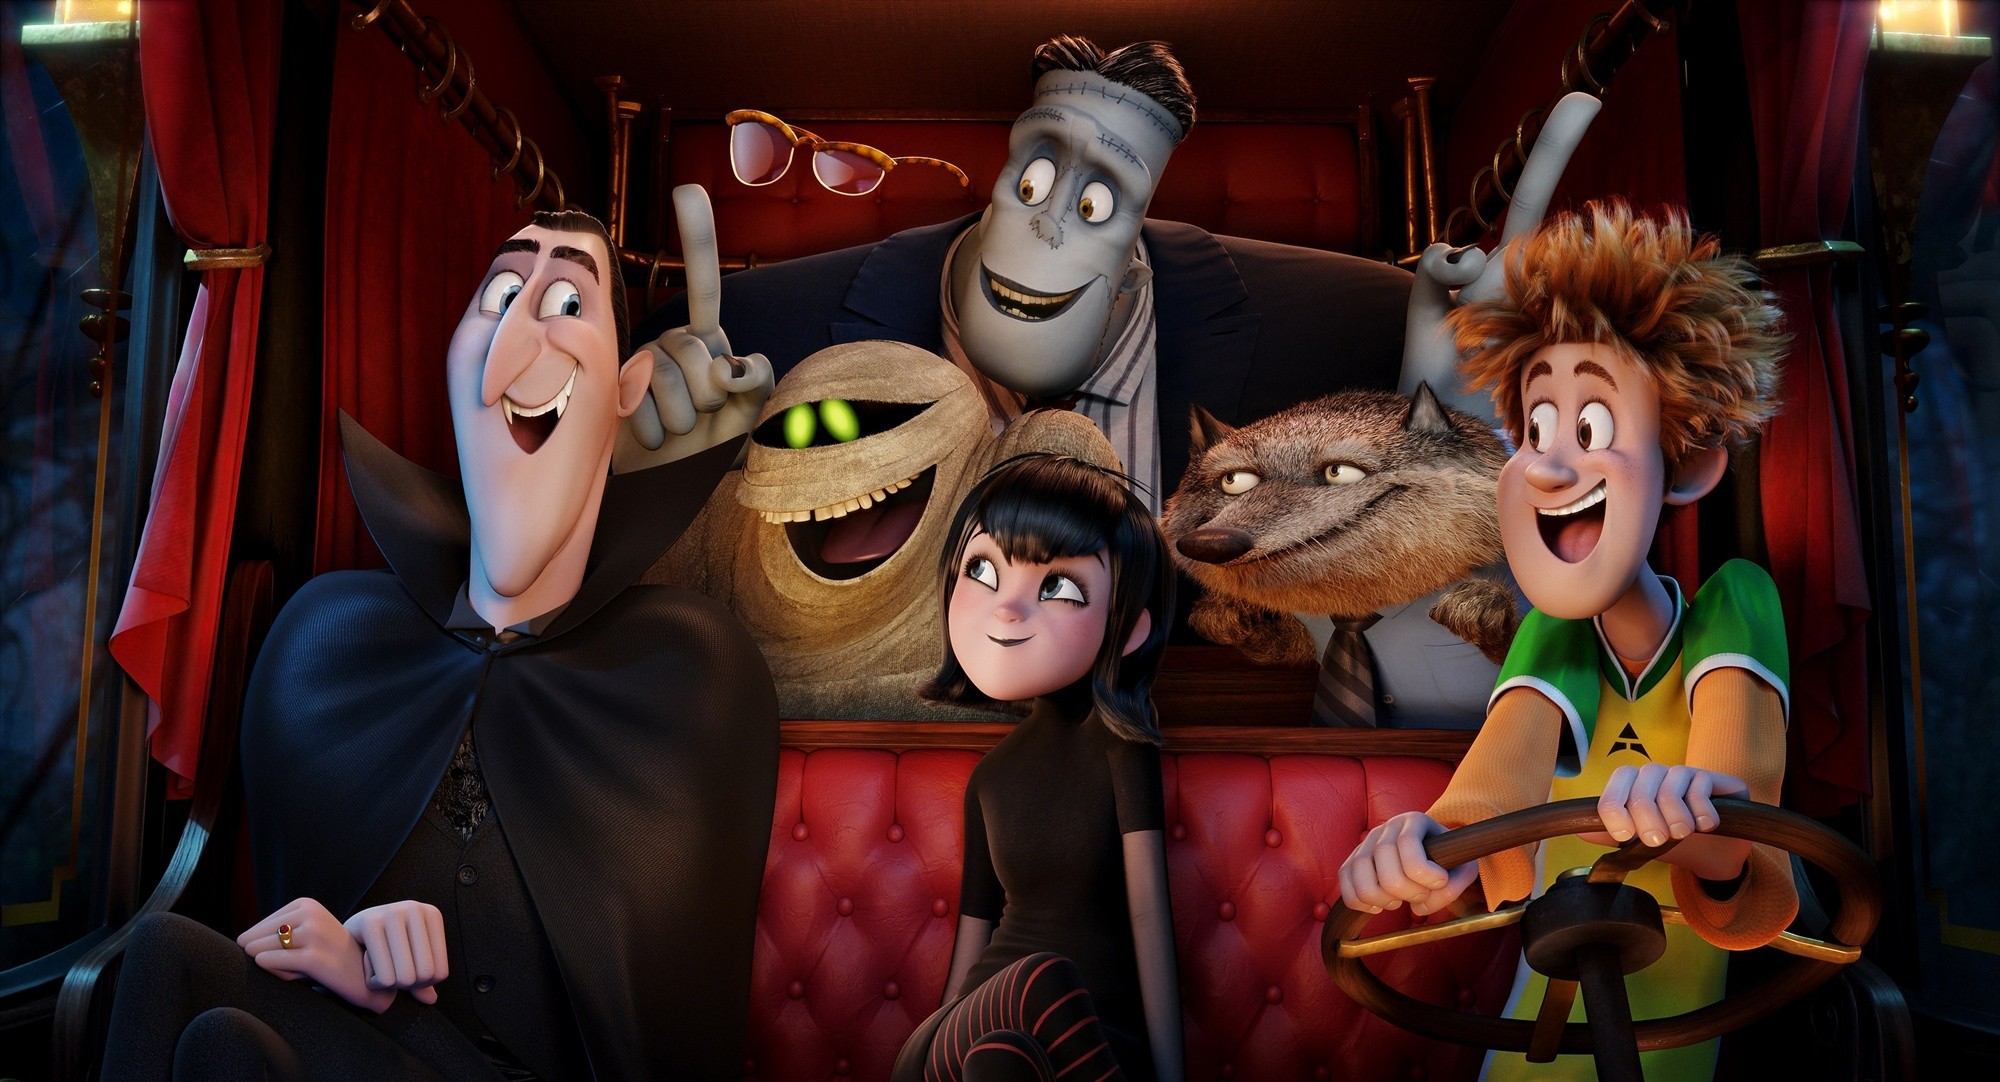 Dracula, Griffin the Invisible Man, Murray the Mummy, Frankenstein, Mavis, Wayne and Jonathan in Columbia Pictures' Hotel Transylvania 2 (2015)